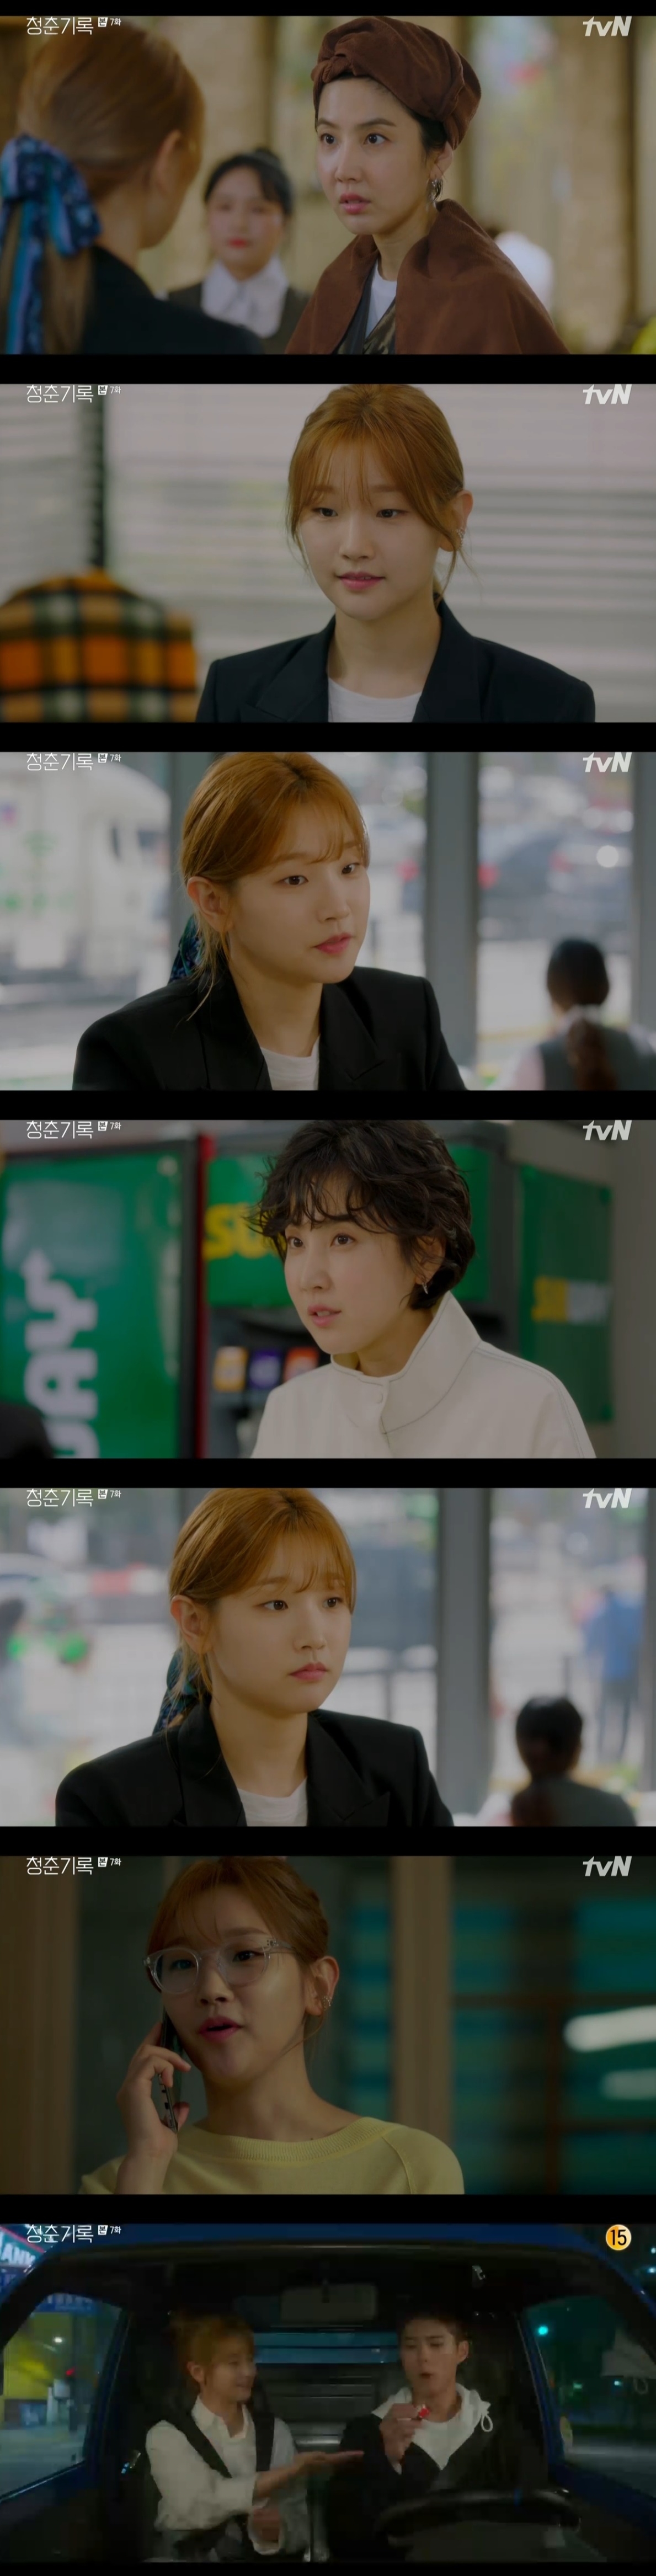 Record of Youth Shin Dong-mi cheered Park So-dam and Park Bo-gums affection.In the TVN drama Record of Youth broadcast on the 28th, Lee Min-jae (Shin Dong-mi) found out about the love affair between Park So-dam and Park Bo-gum.On this day, Min-jae changed her hairstyle to find a shop where she worked, and they went to lunch for hamburgers.When Min Jae showed himself to be a manager who is an accident for an artist, he said, I thought it was special when I saw my sister.I felt a sense of life, like an untamed wild horse, Min-jae said, trying to free Min-jaes mind.So Hye-joon likes it, he said.Hye Jun will love you to the end of Space, Min Jae said, not a pleasant word, and I dont think another woman will do it.But Min-jae defended Hye-joon, saying, A man who has finished without 0.01g, is not attractive. So Jeong-ha admitted Hye-joon as attractive.On the other hand, Min Jae revealed that Hye Juns casting was canceled because of him, and asked him to comfort Hye Jun. He added, I hit the accident, but can not you finish it?He said, Will you be comforted that I comfort you? He showed no confidence, but then called out Hye-joon, who was crying, and comforted him.On the other hand, TVN Wolhwa drama Record of Youth is a drama depicting the growth Record of Youth people who try to achieve their dreams and love without despairing on the wall of reality.